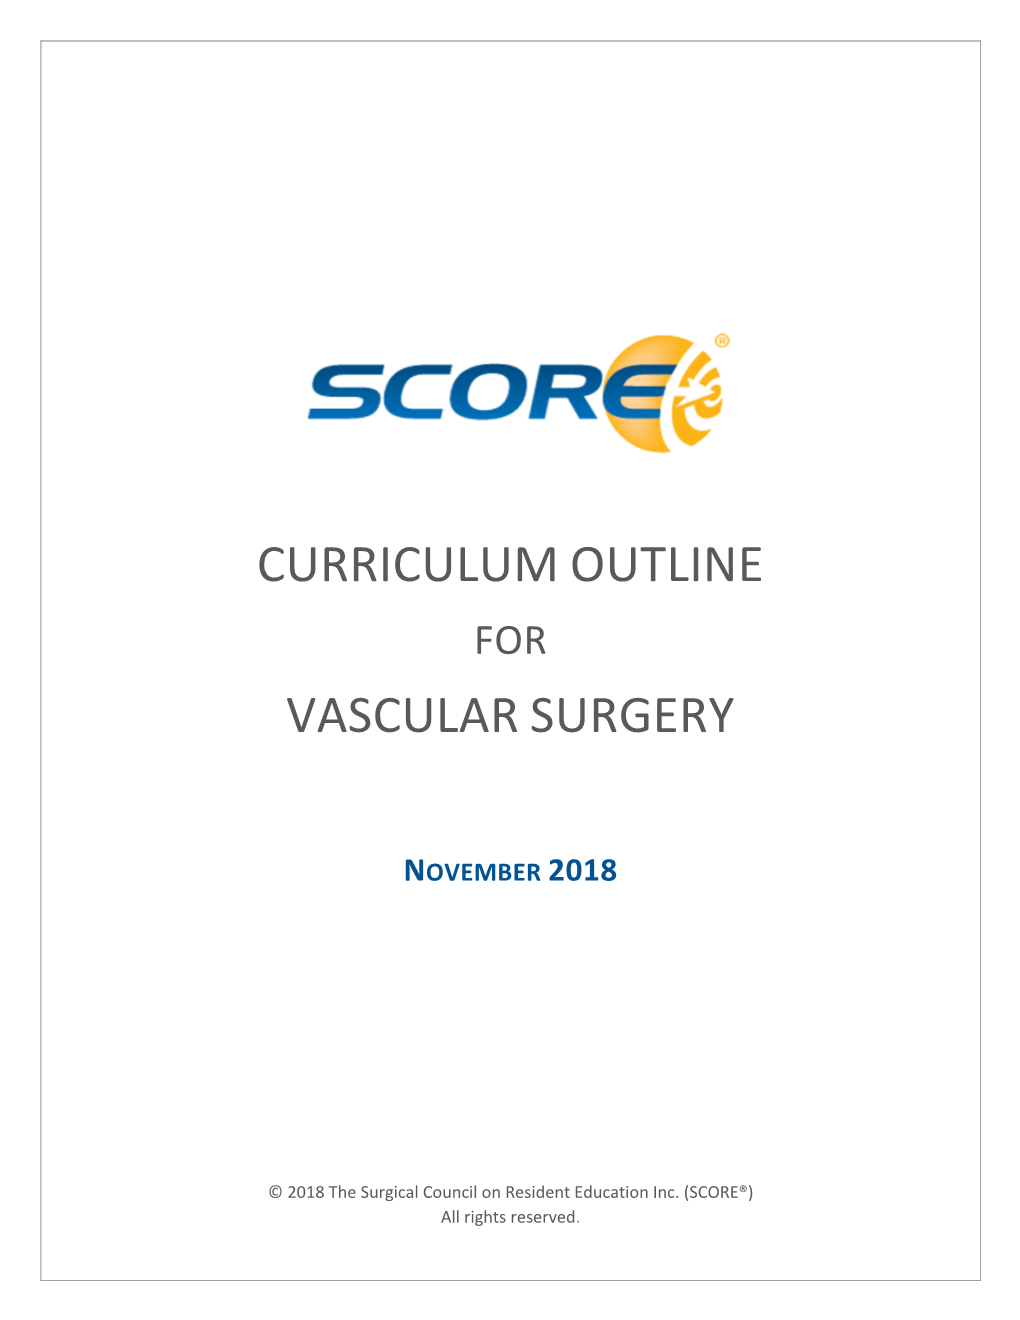 SCORE Curriculum Outline for Vascular Surgery (Integrated And